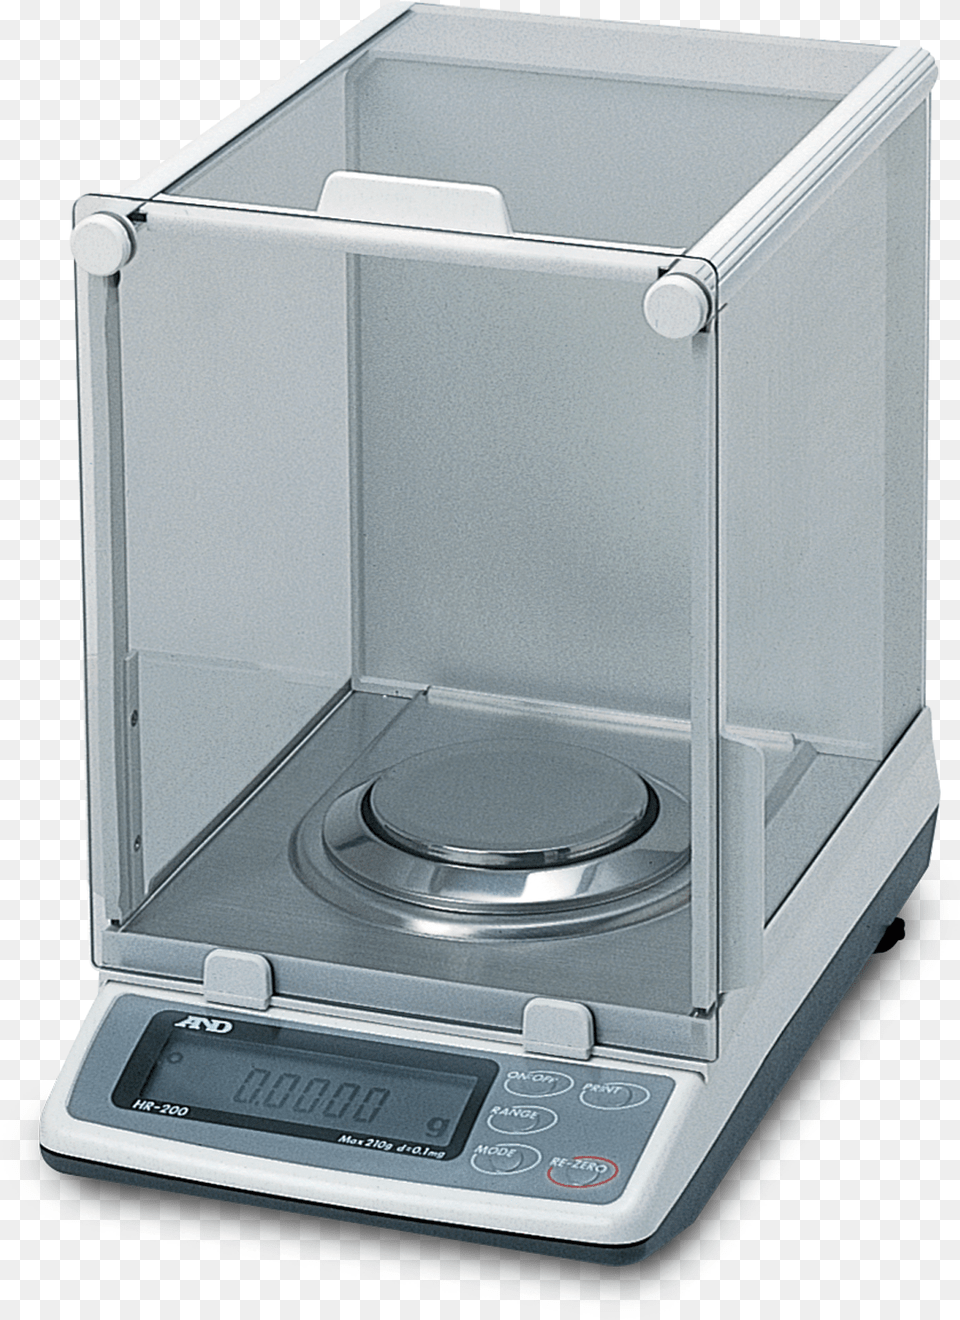 View Hd Weighing Scale For Lab Png Image